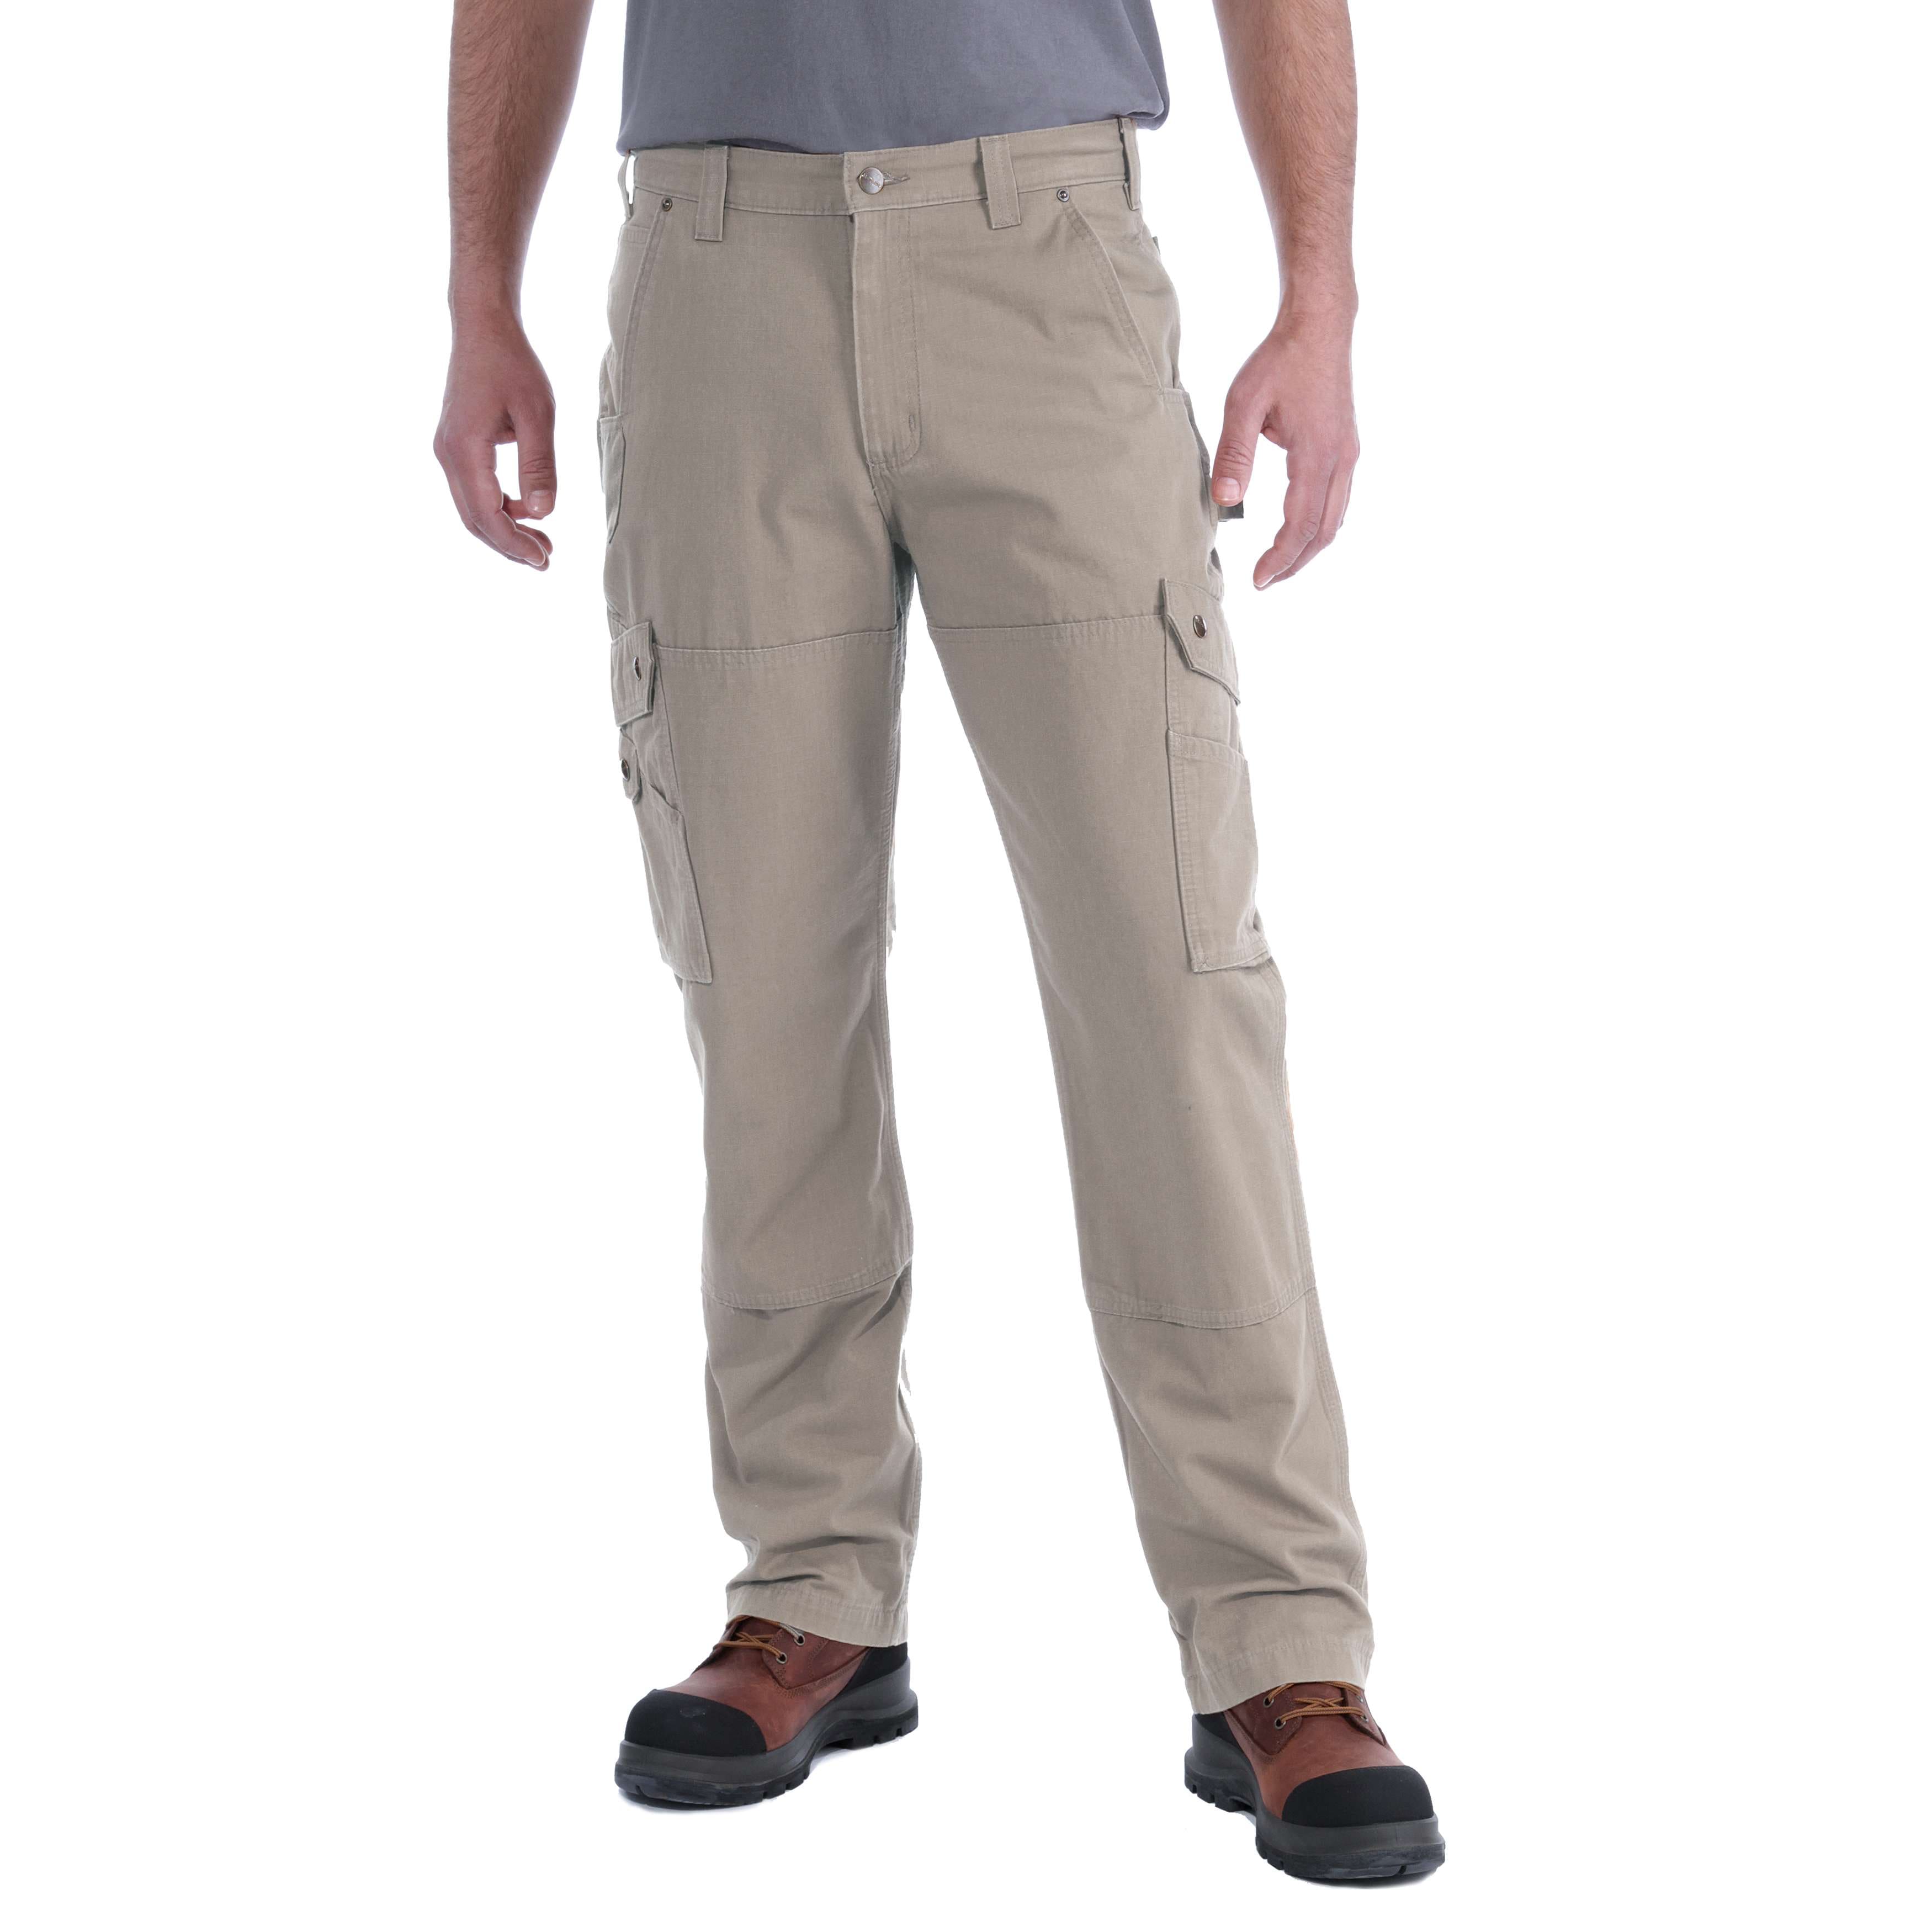 Shop Carhartt Tapered Pants Street Style Cotton Oversized Cargo